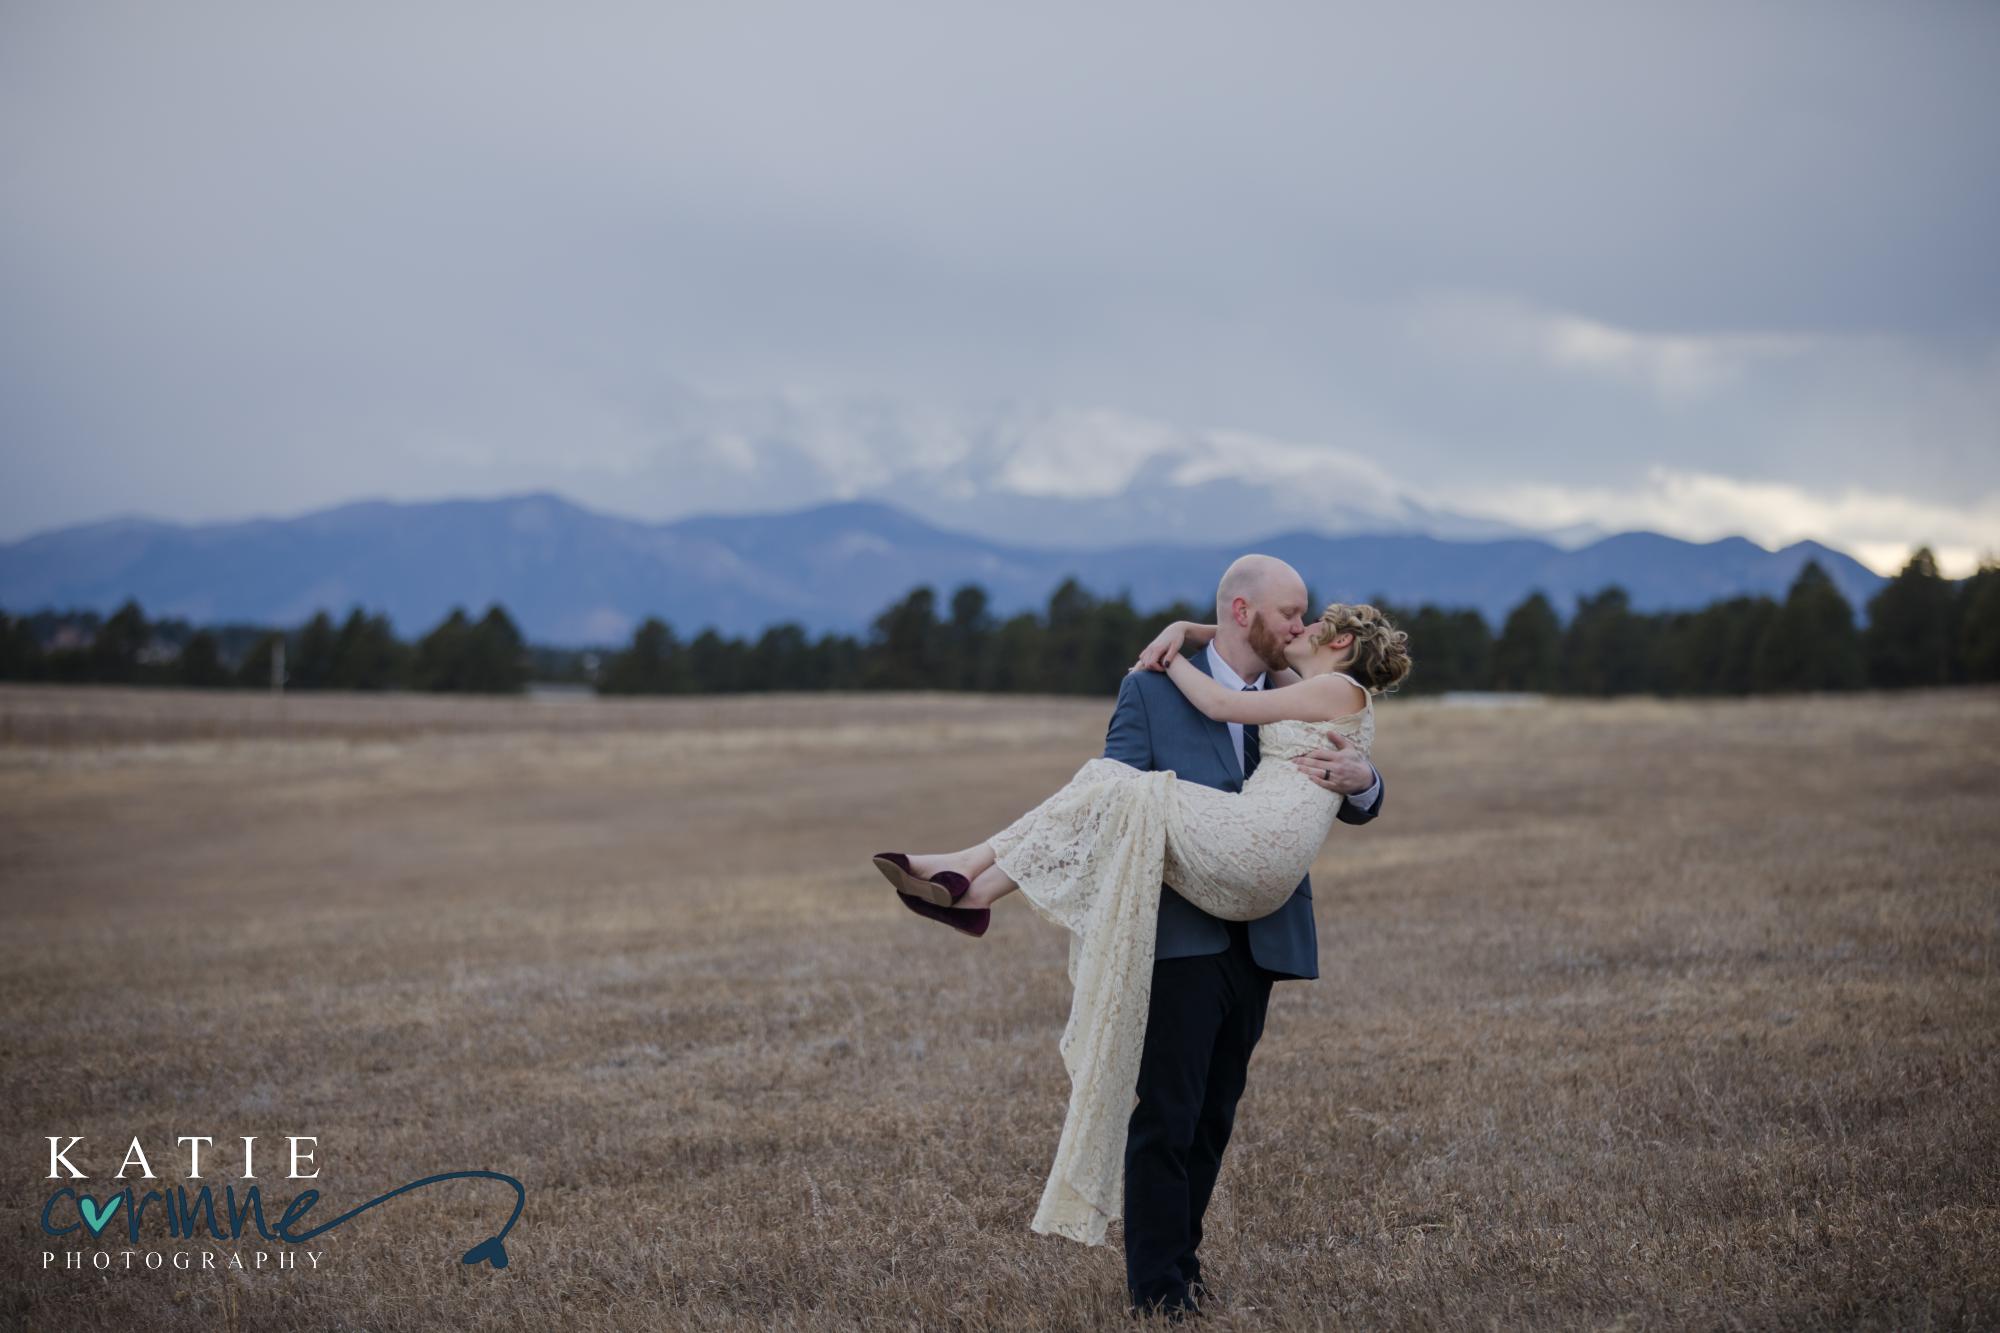 Bride carries groom and couple kisses in front of mountains